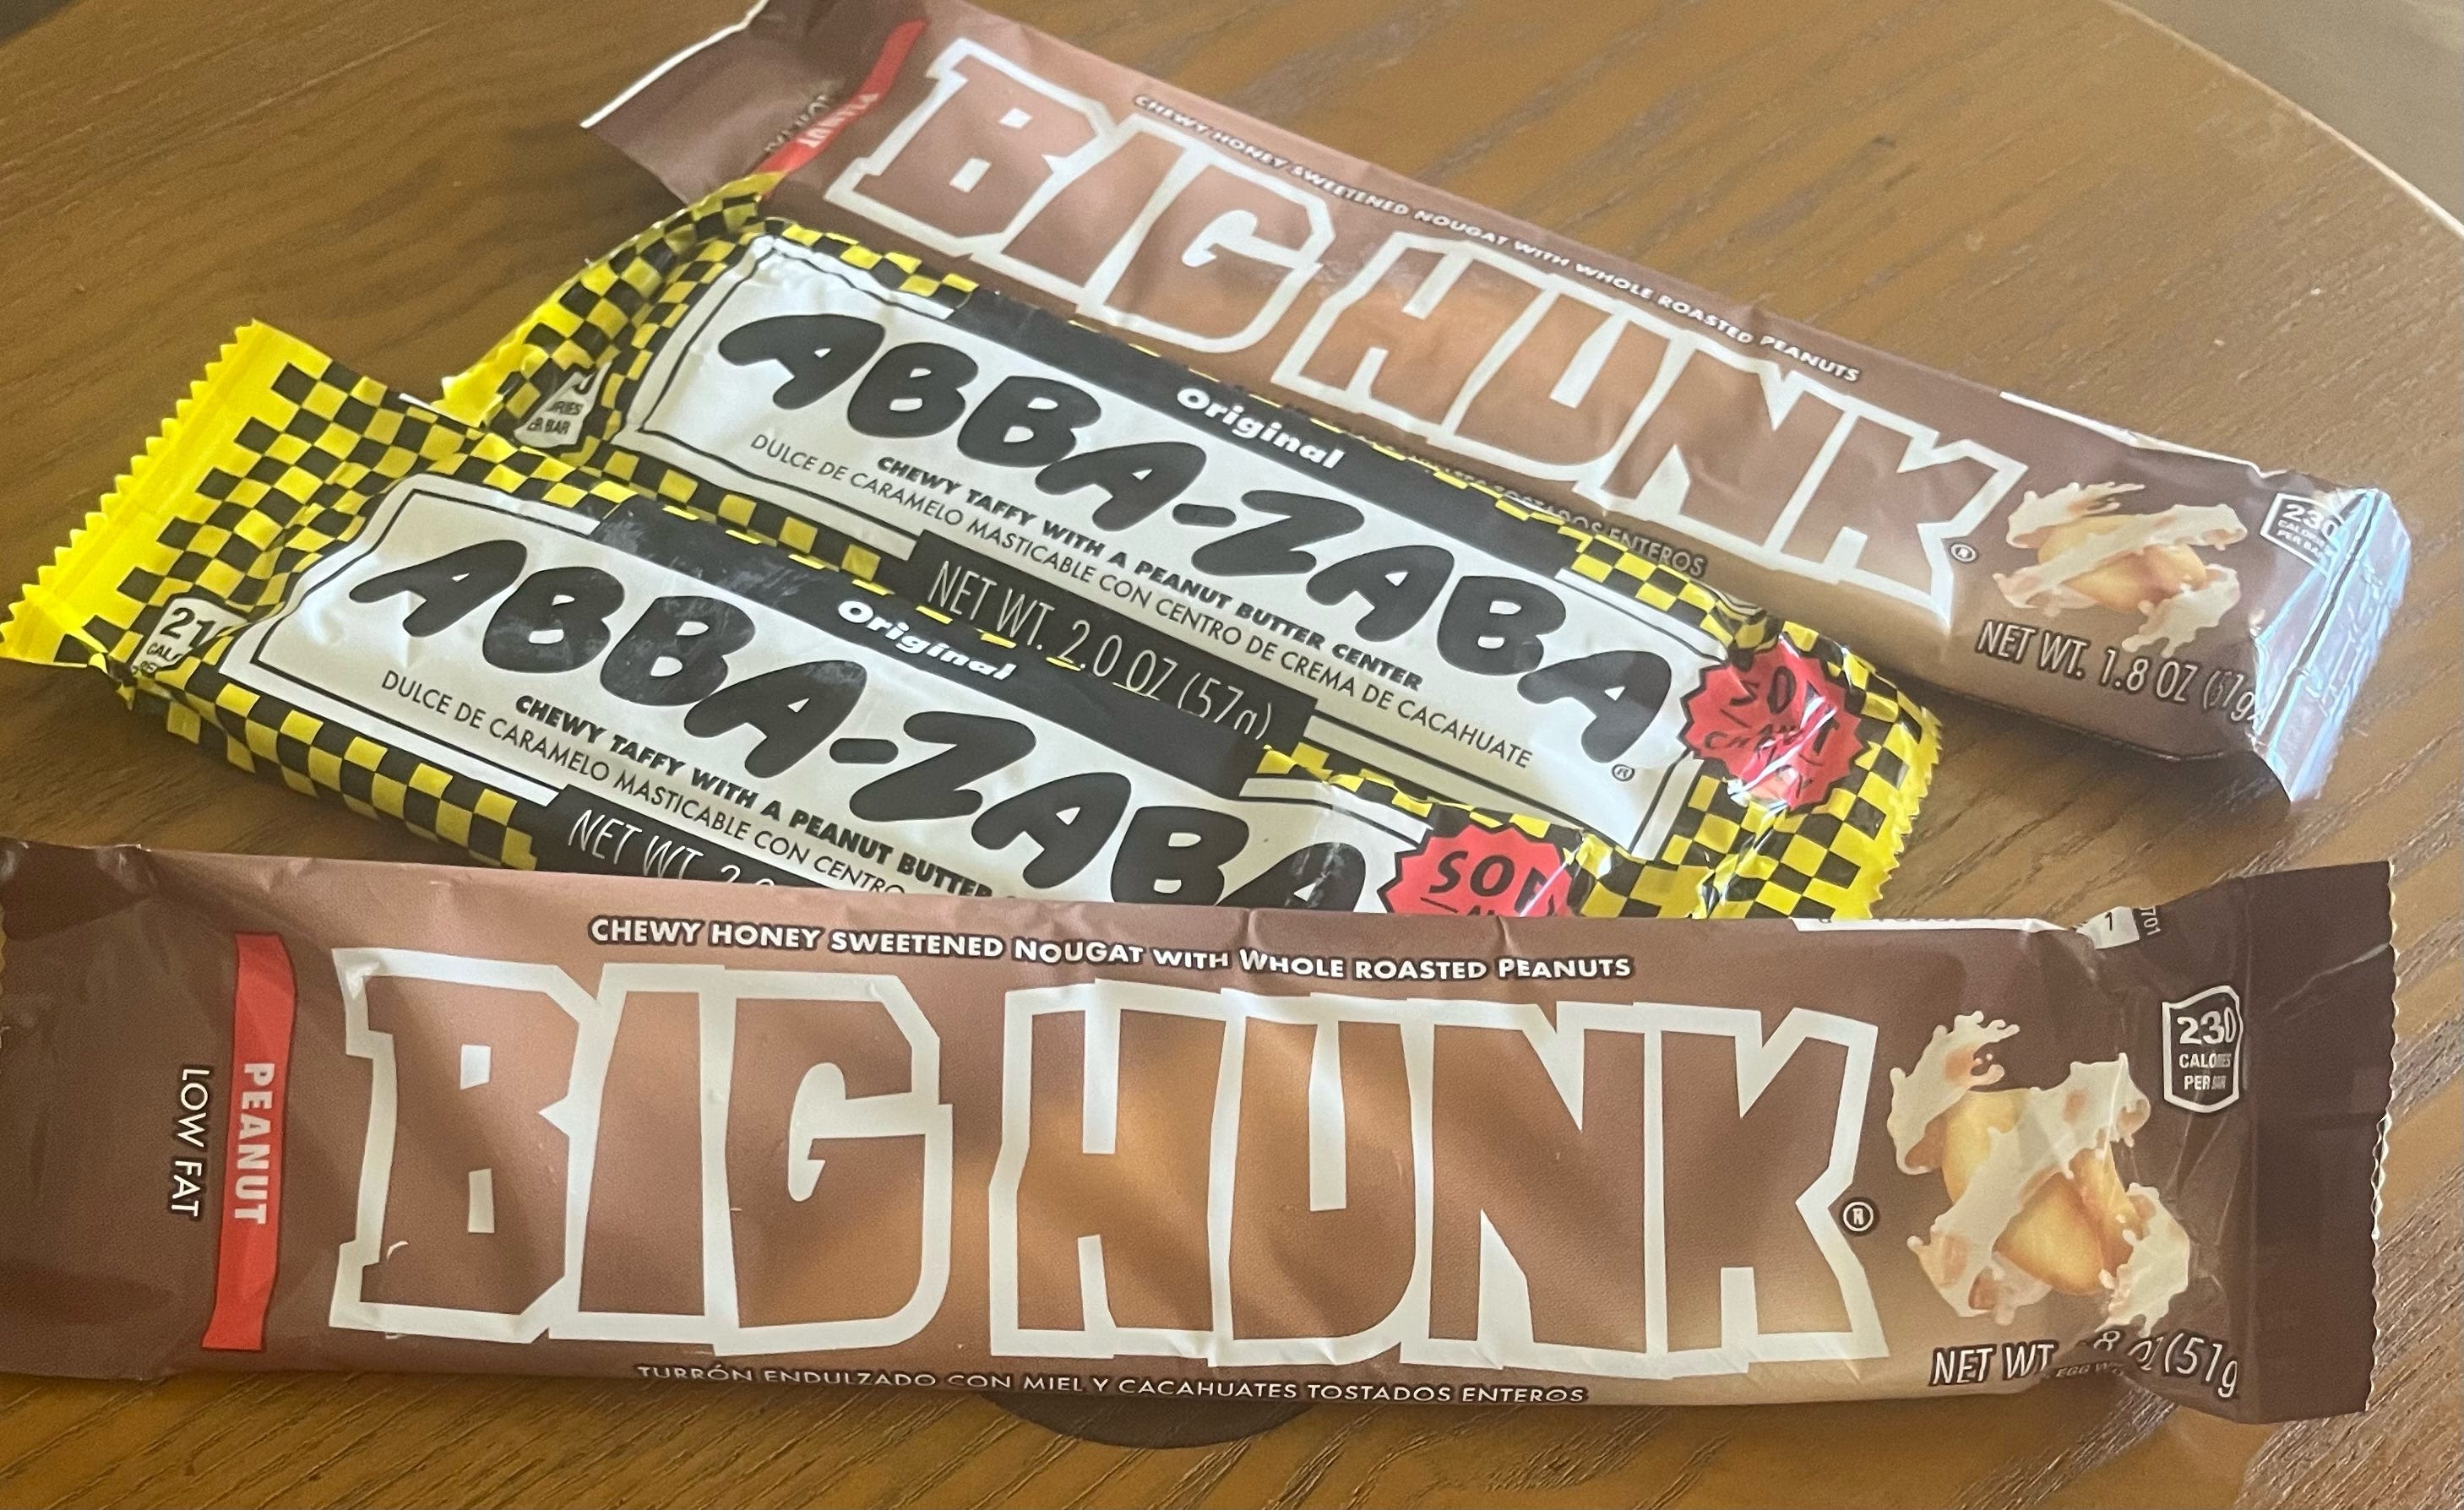 Iconic California candy bar factory to be shuttered. But Big Hunk, Abba Zabba to live on